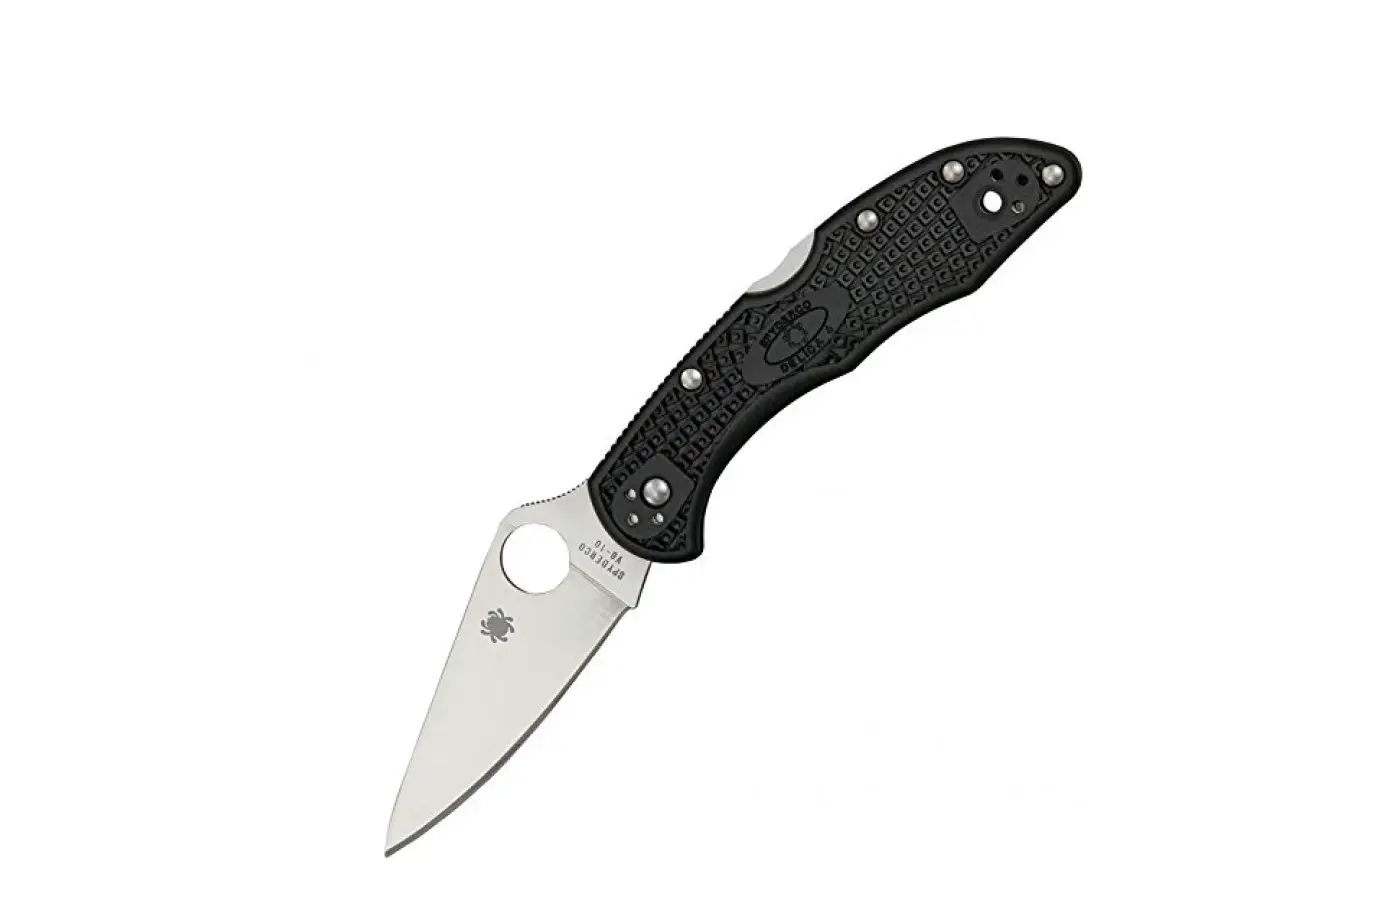 There are three types of steel to choose from as with any spyderco blade.